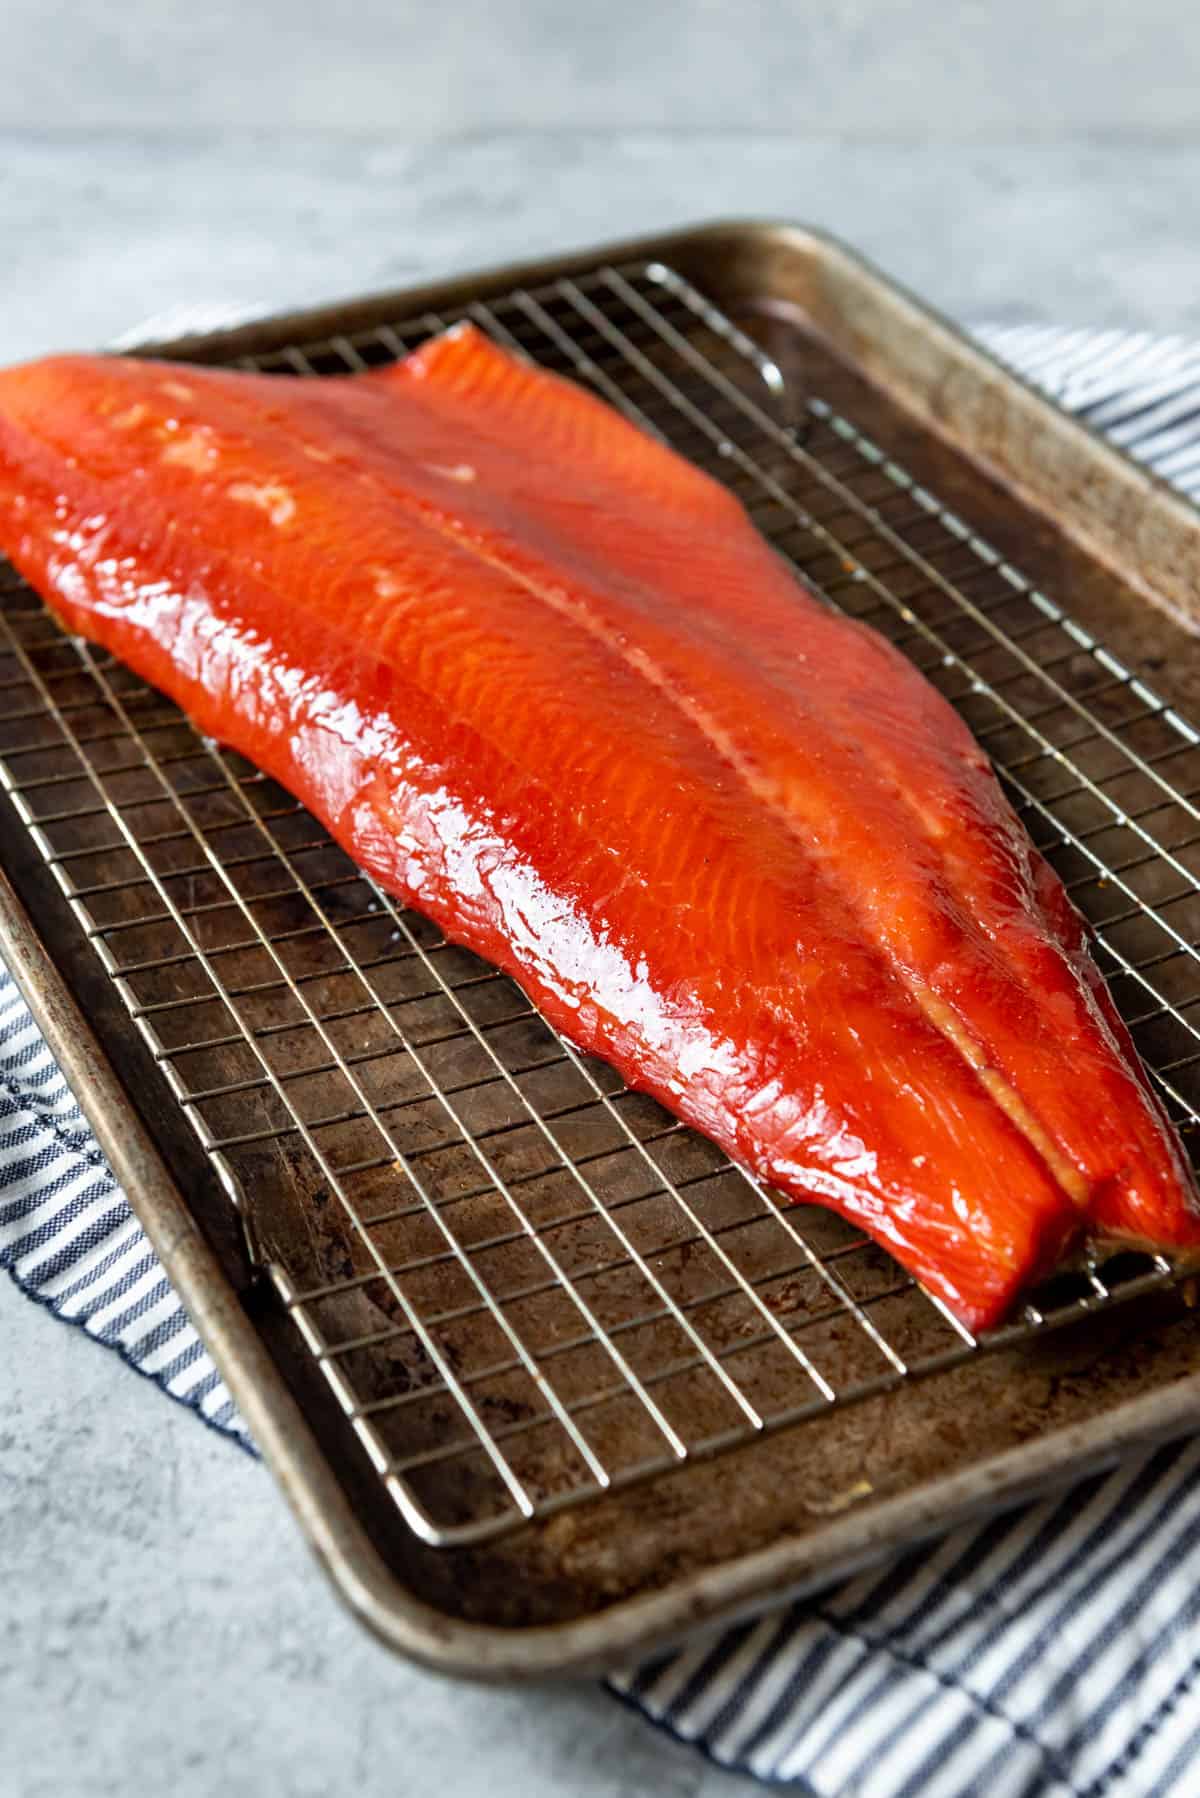 An image of a large whole piece of salmon with the skin-on that has been smoked on a Traeger pellet grill.